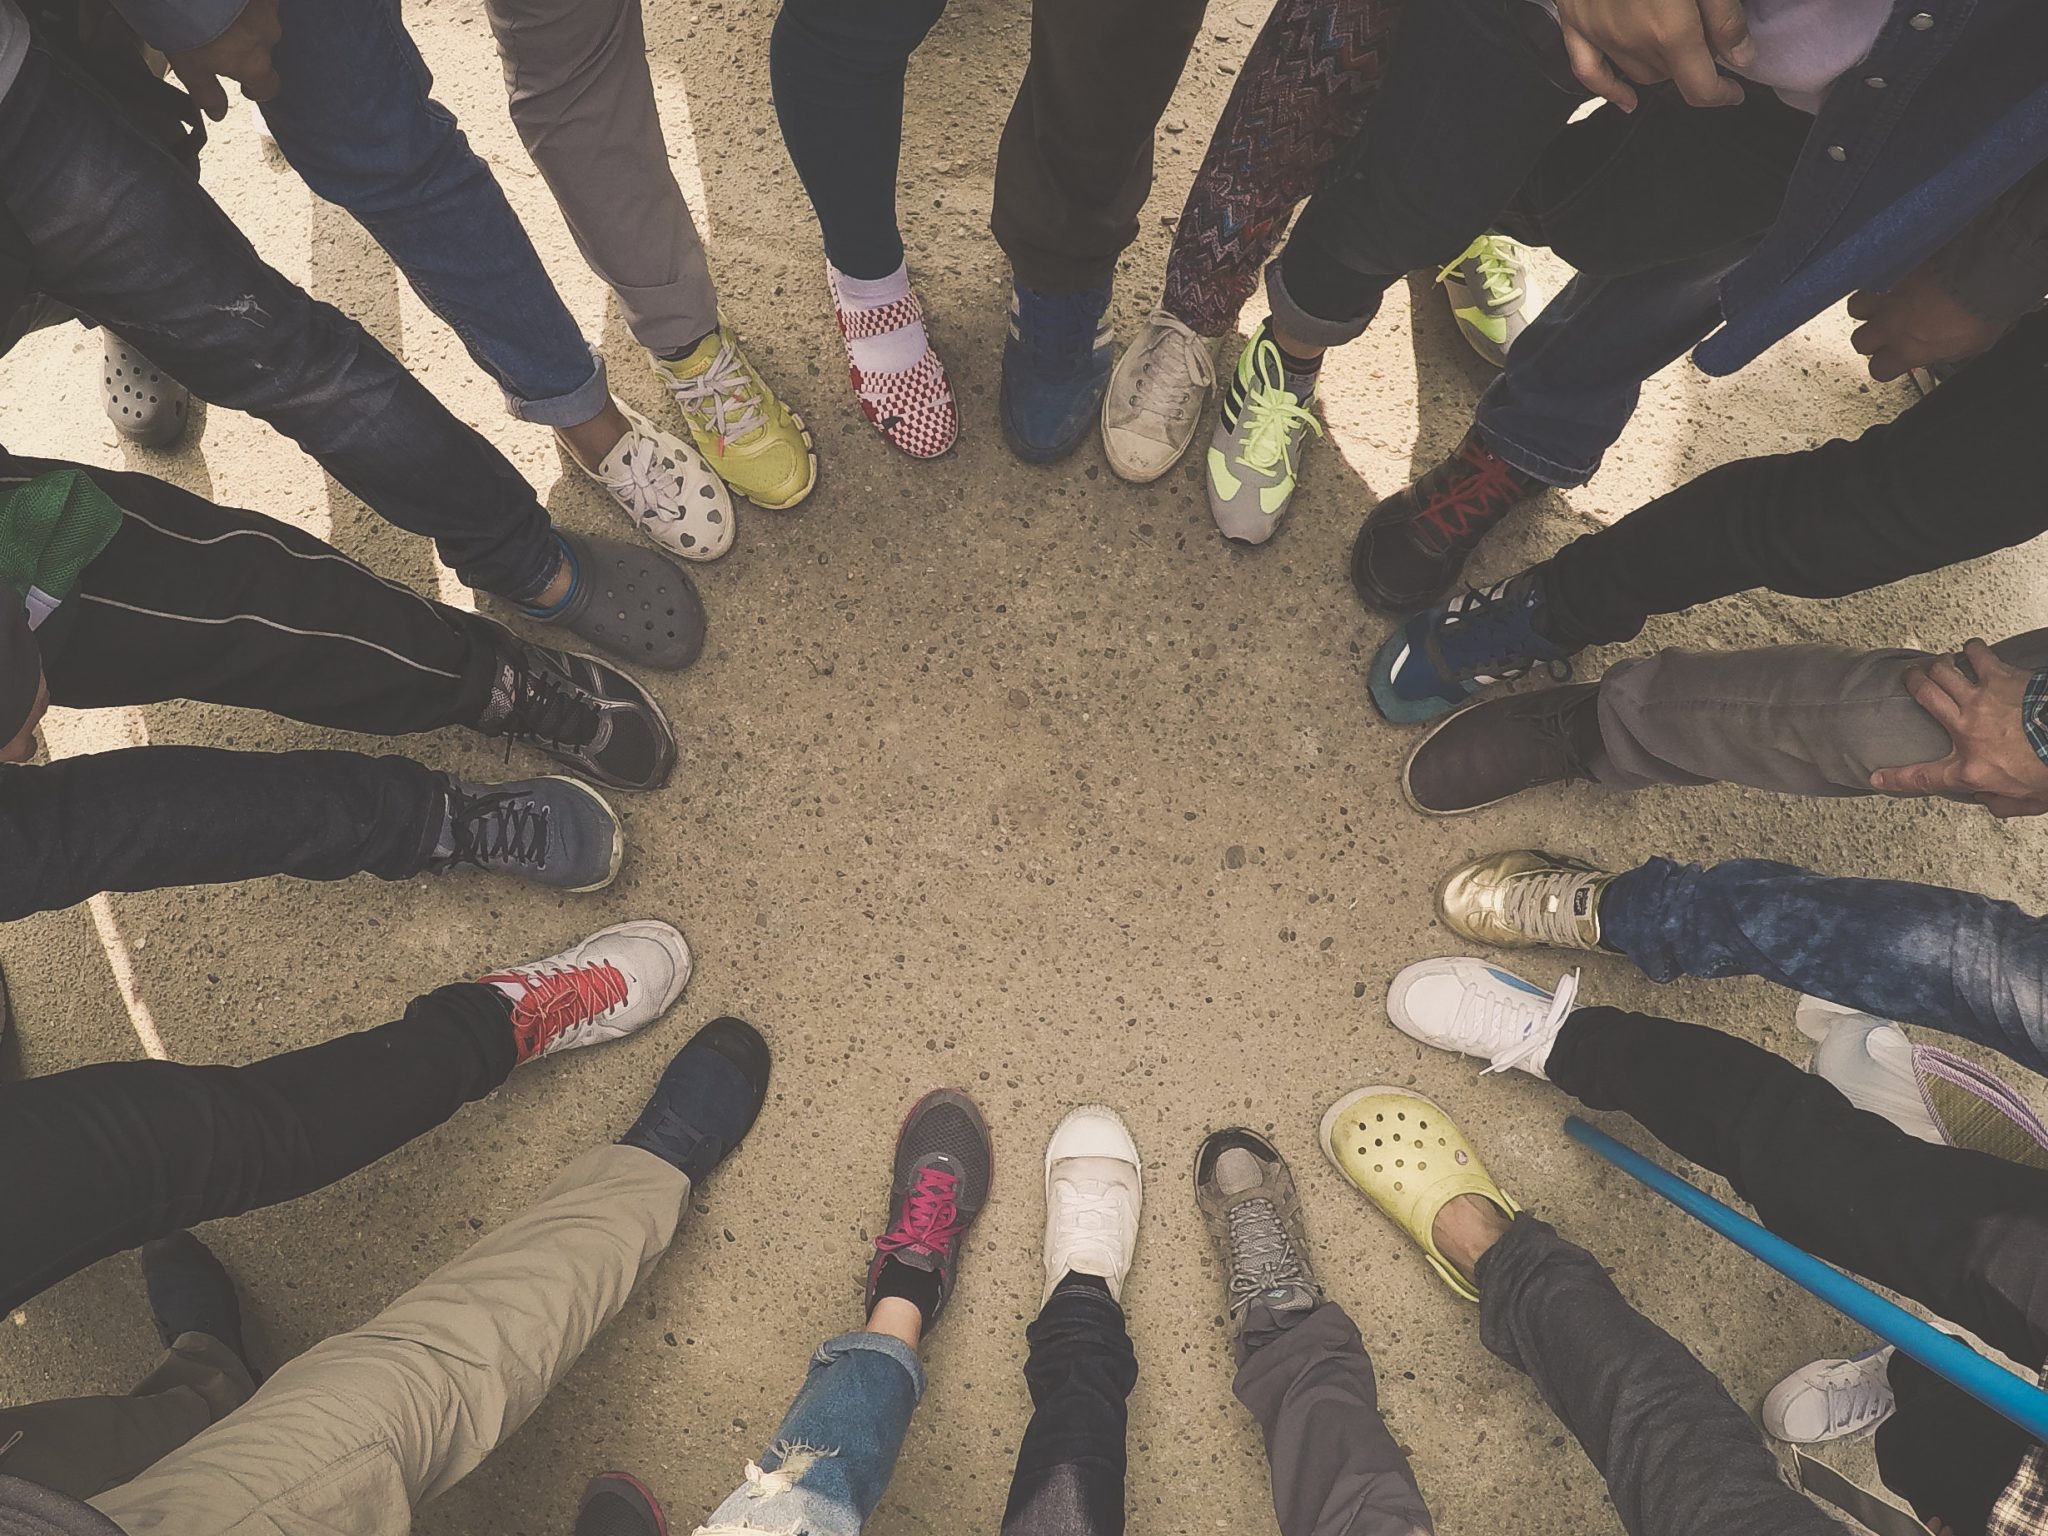 Group of people putting their feet in a circle